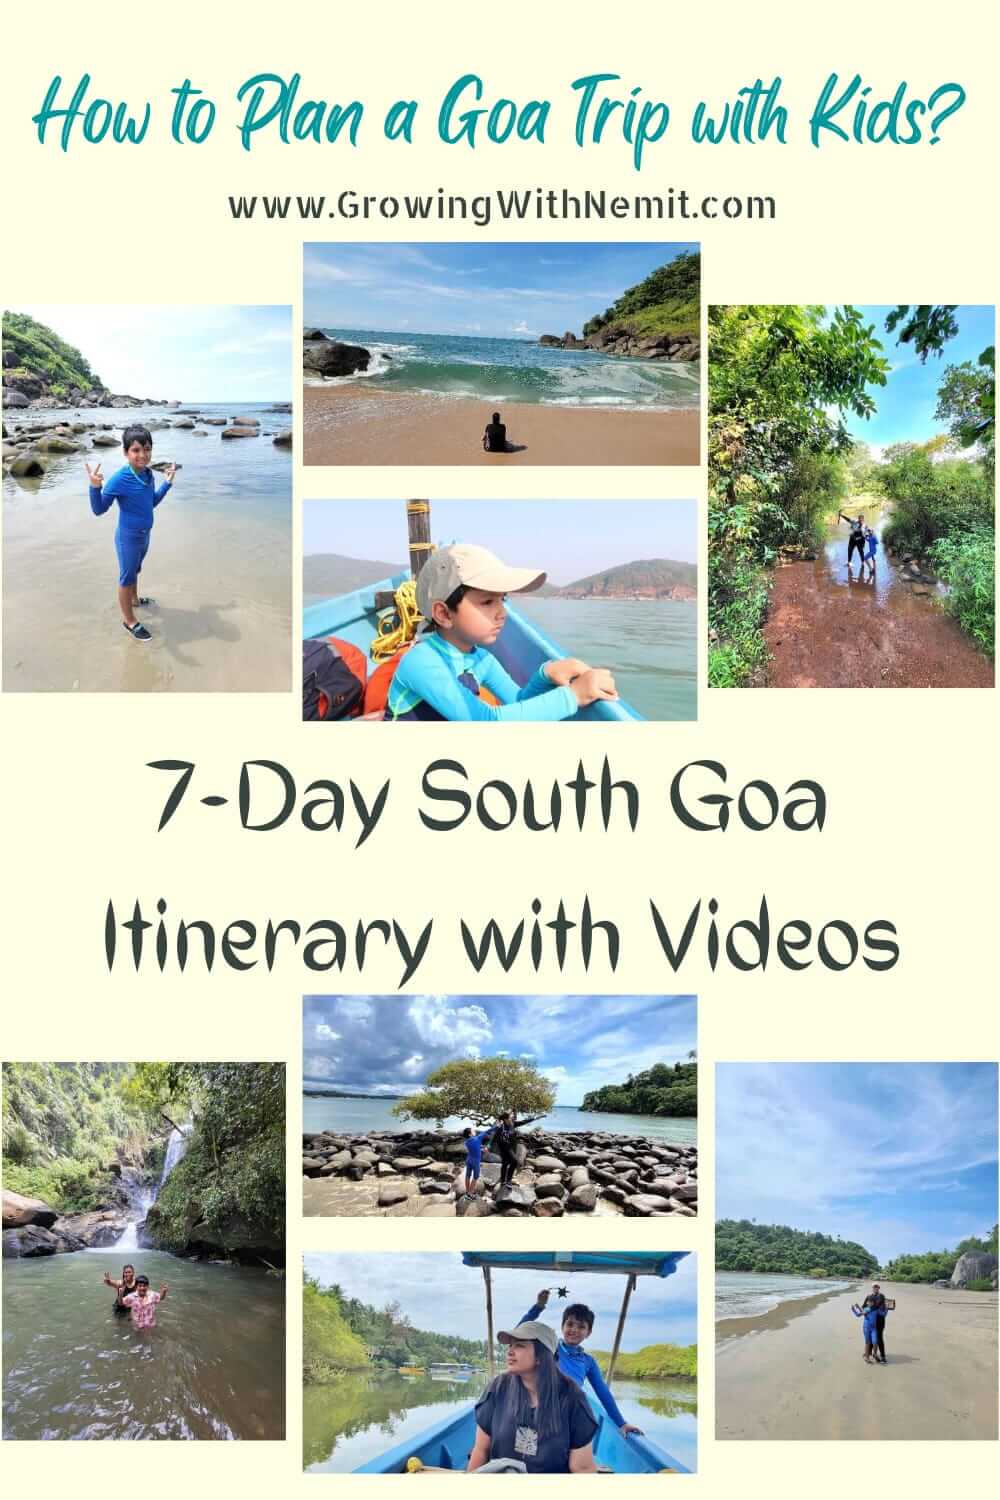 South Goa Itinerary is one of the most requested topics and I had also promised to take this up on my blog. So, here we are!